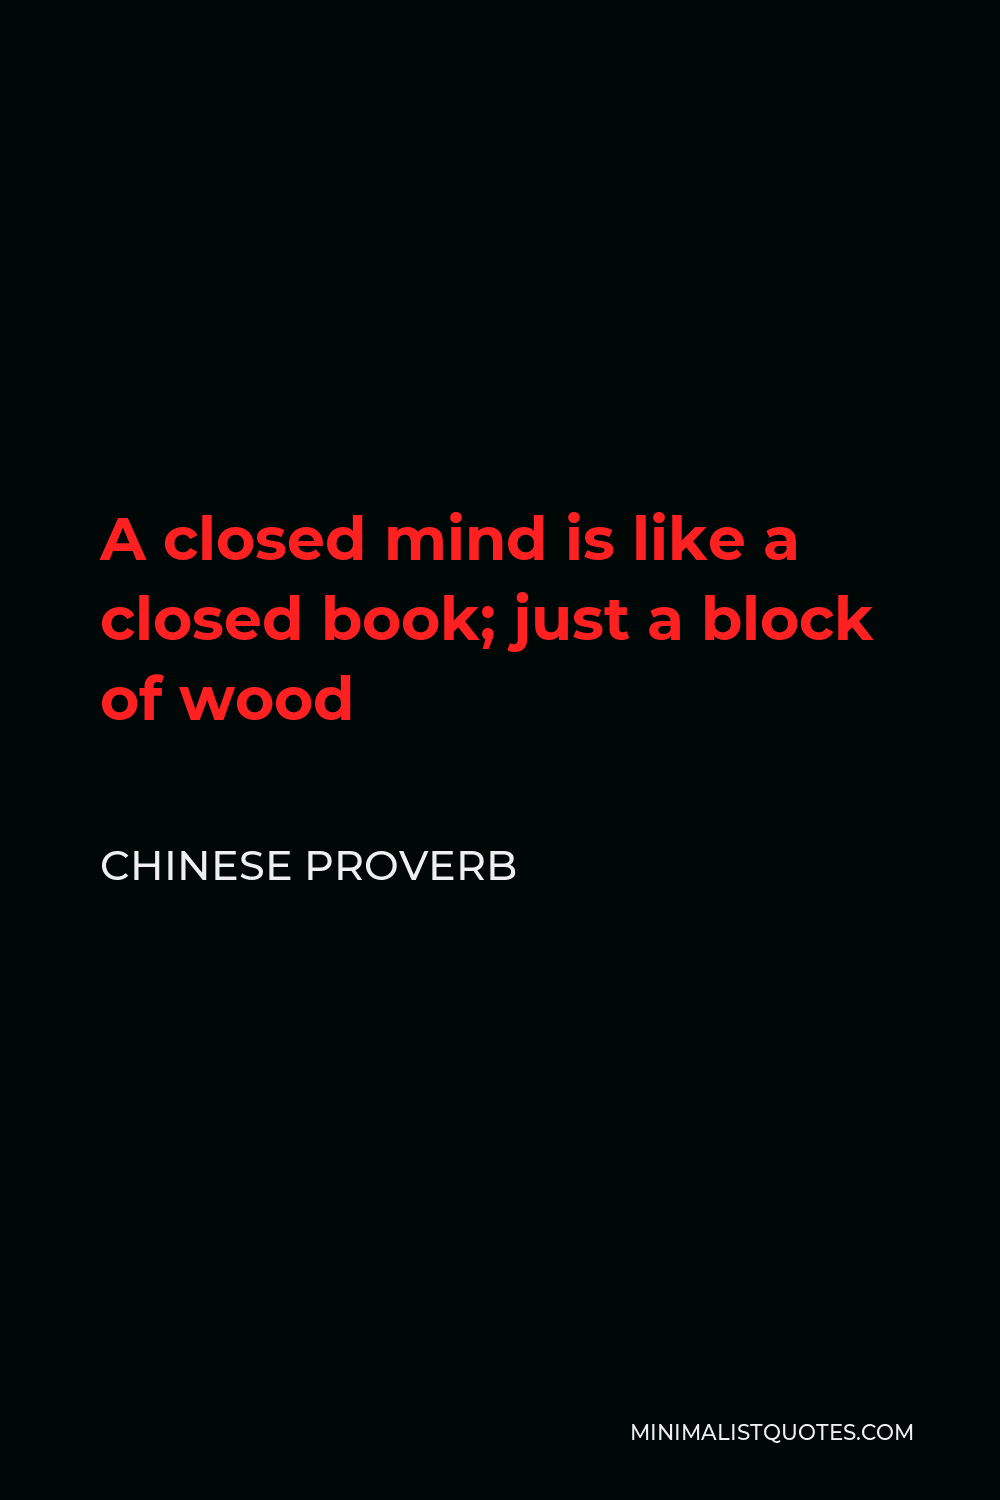 Chinese Proverb Quote - A closed mind is like a closed book; just a block of wood